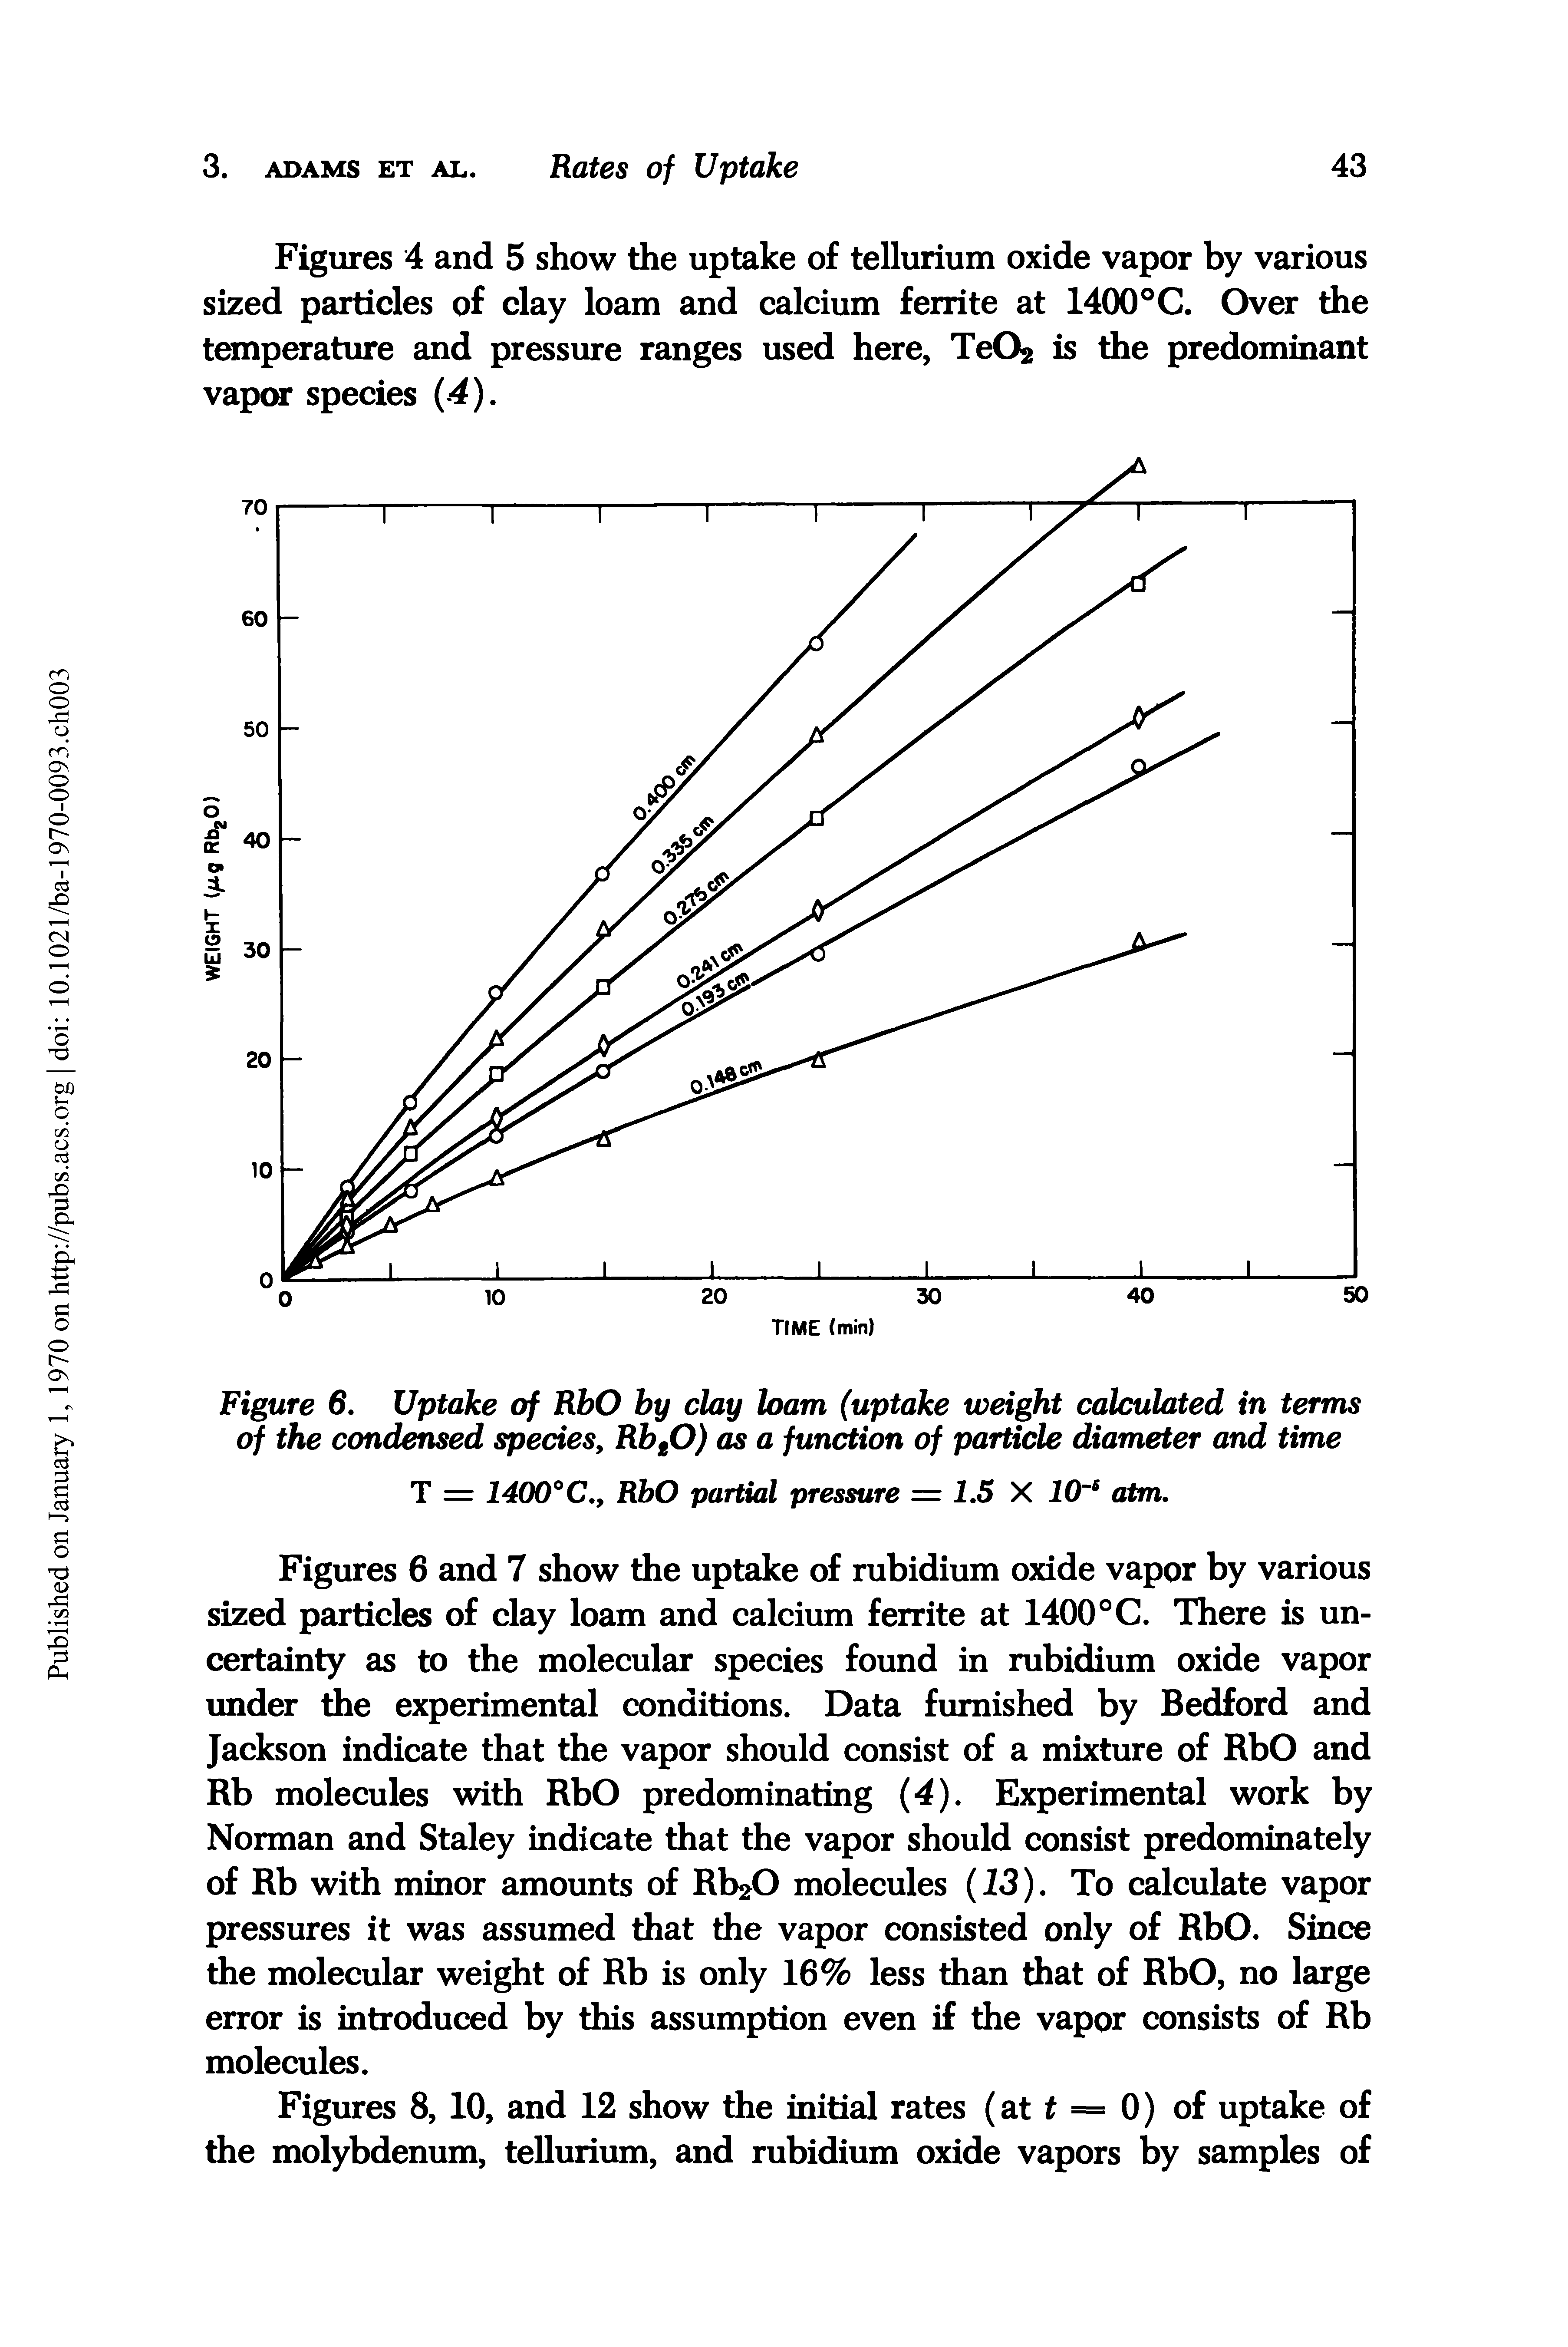 Figures 6 and 7 show the uptake of rubidium oxide vapor by various sized particles of clay loam and calcium ferrite at 1400°C. There is uncertainty as to the molecular species found in rubidium oxide vapor under the experimental conditions. Data furnished by Bedford and Jackson indicate that the vapor should consist of a mixture of RbO and Rb molecules with RbO predominating (4). Experimental work by Norman and Staley indicate that the vapor should consist predominately of Rb with minor amounts of Rt O molecules (13). To calculate vapor pressures it was assumed that the vapor consisted only of RbO. Since the molecular weight of Rb is only 16% less than that of RbO, no large error is introduced by this assumption even if the vapor consists of Rb molecules.